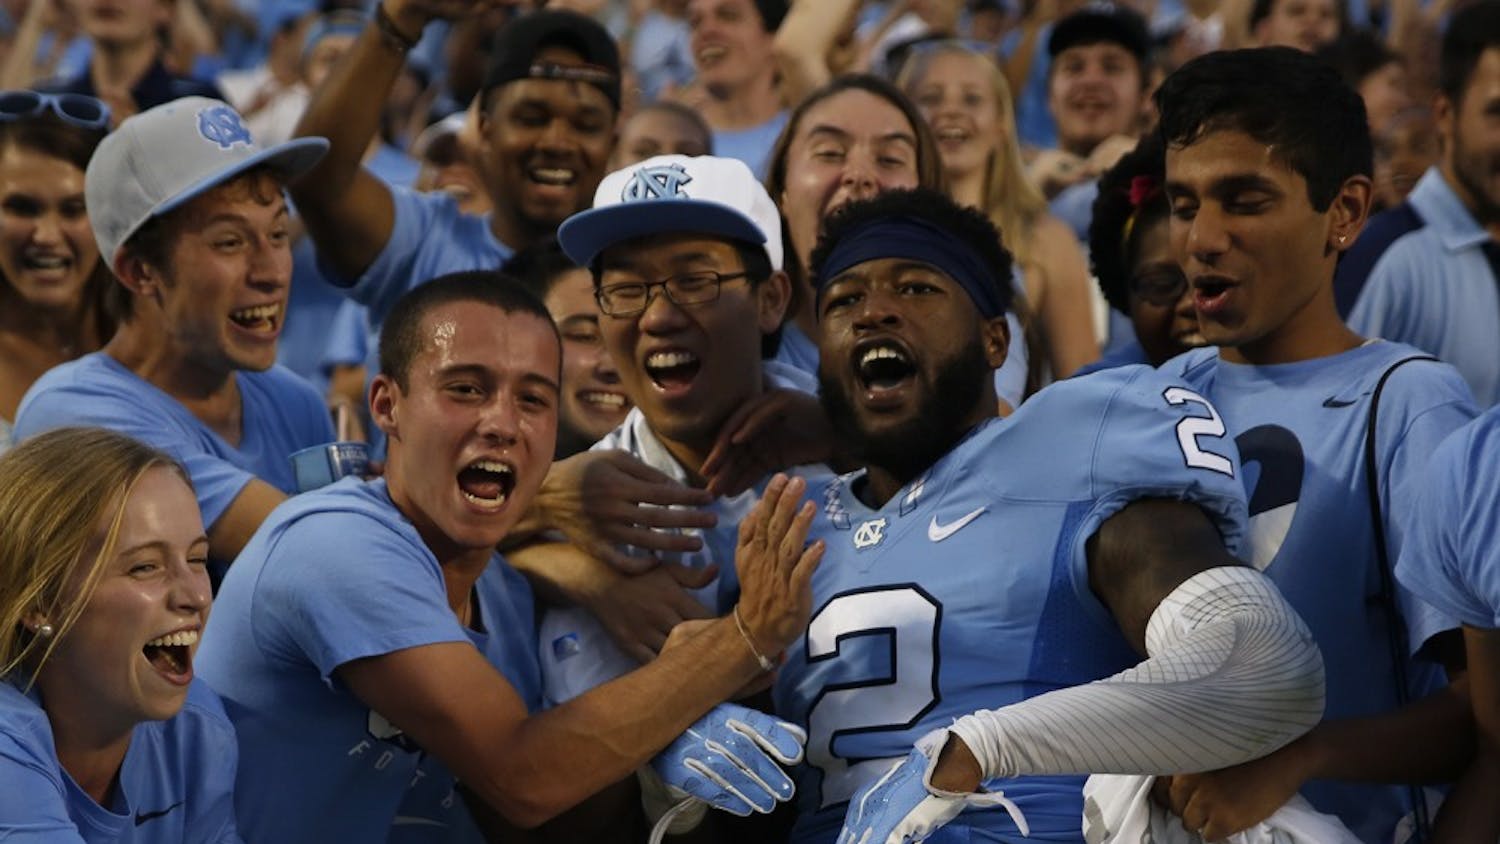 UNC senior cornerback Des Lawrence (2) celebrates the football team's last second victory over Pittsburgh with fans&nbsp;on Sep. 24.